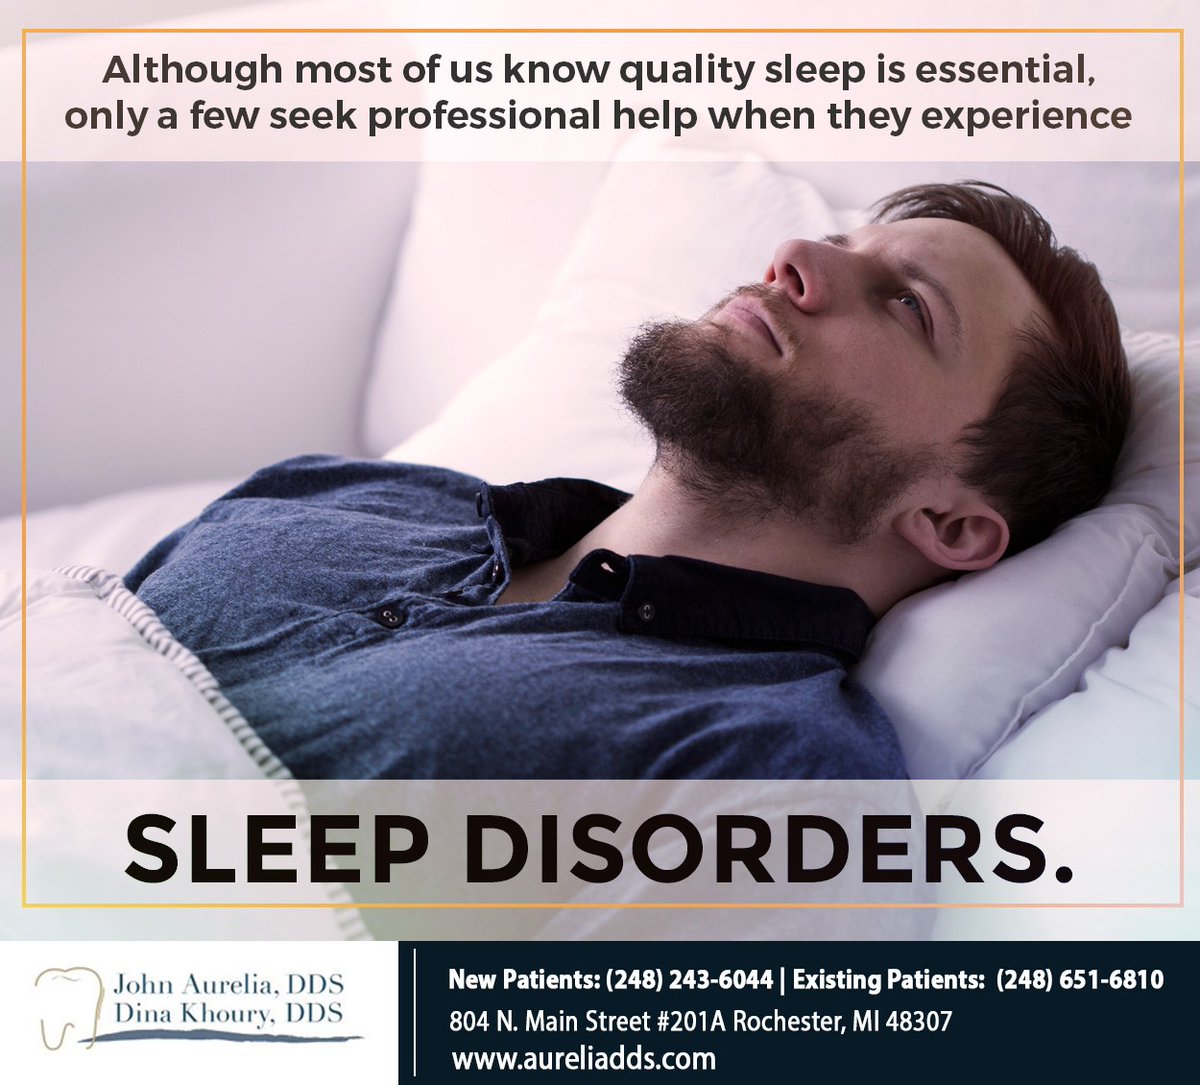 Sleep disorders can widely affect your mental and emotional well-being. Although it may seem simple, severe cases can even be life-threatening. Early treatment is vital; visit aureliadds.com now. #sleepdisorders #rochester #MI #aureliadds